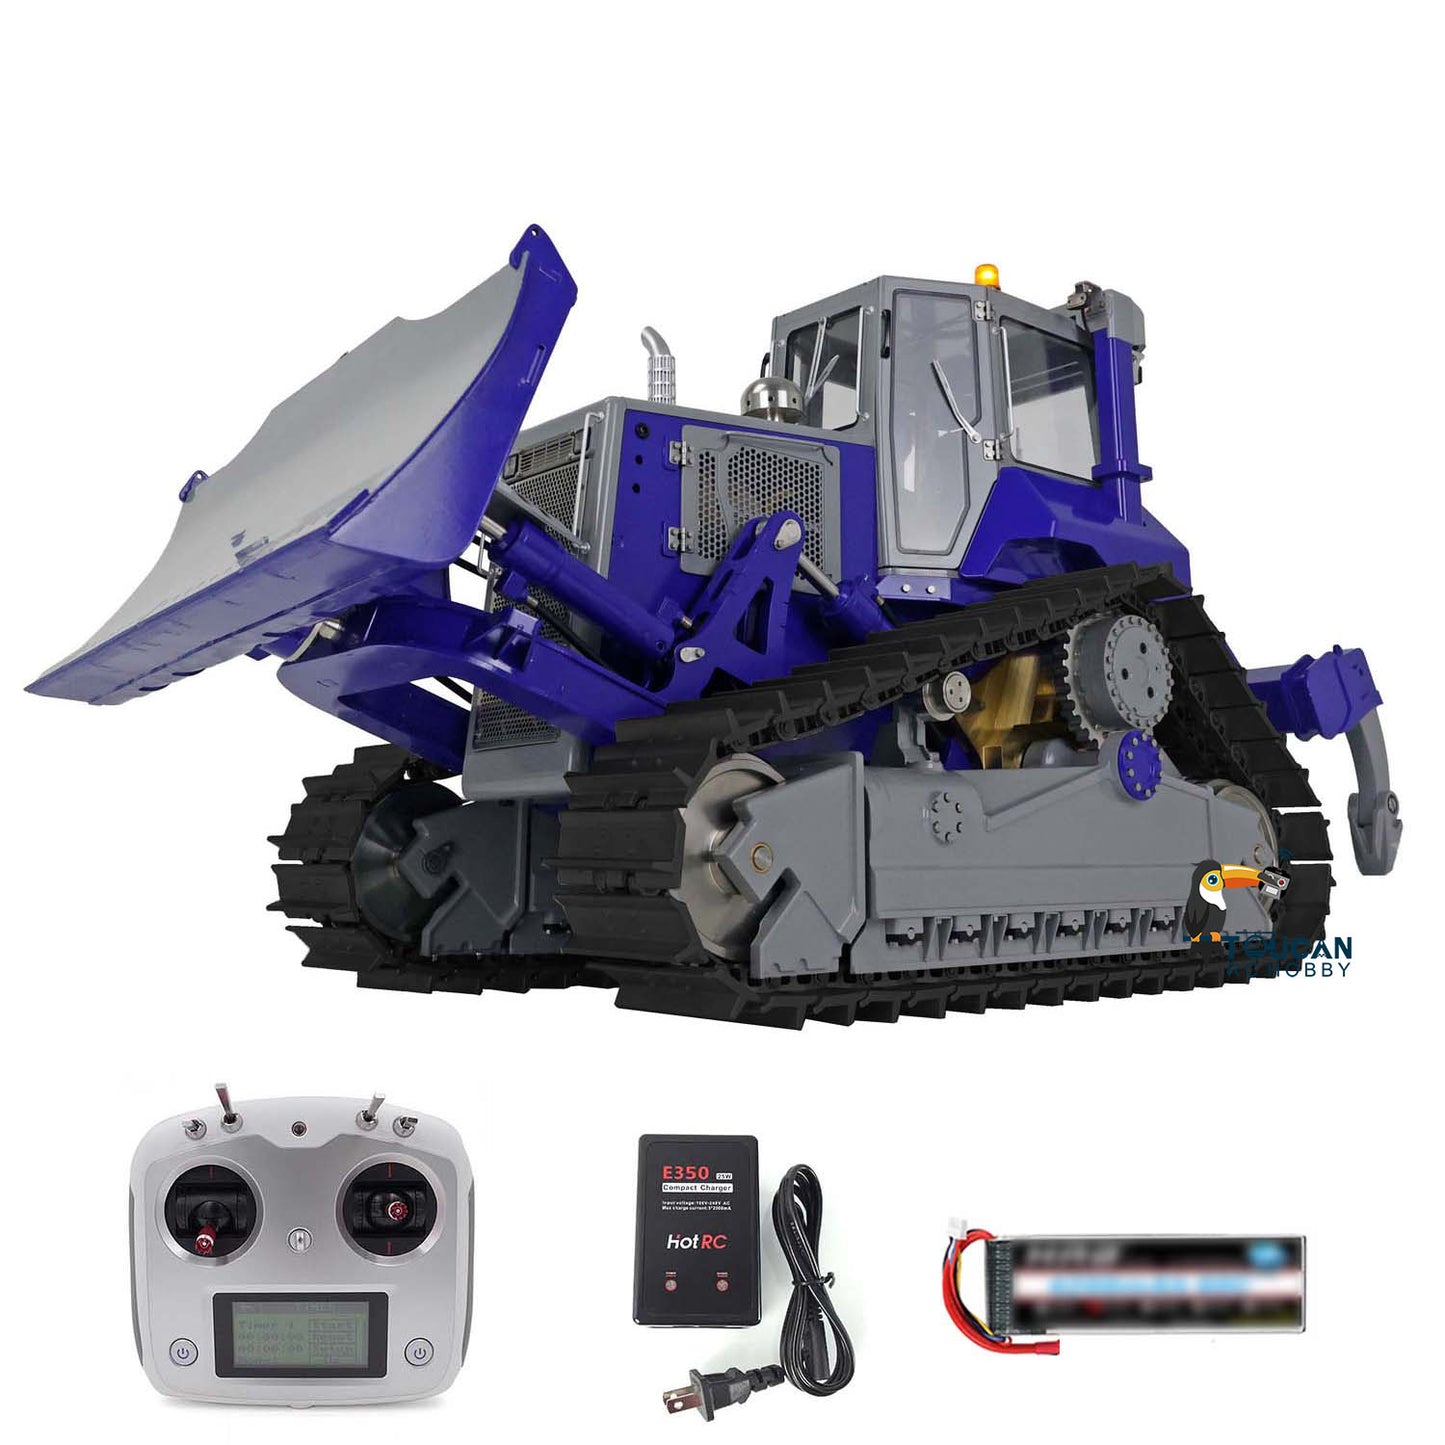 LESU 1/14 RTR RC Bulldozer Aoue-DT60 Hydraulic Painted and Assembled Model Motor Servo ESC Sound & Light System